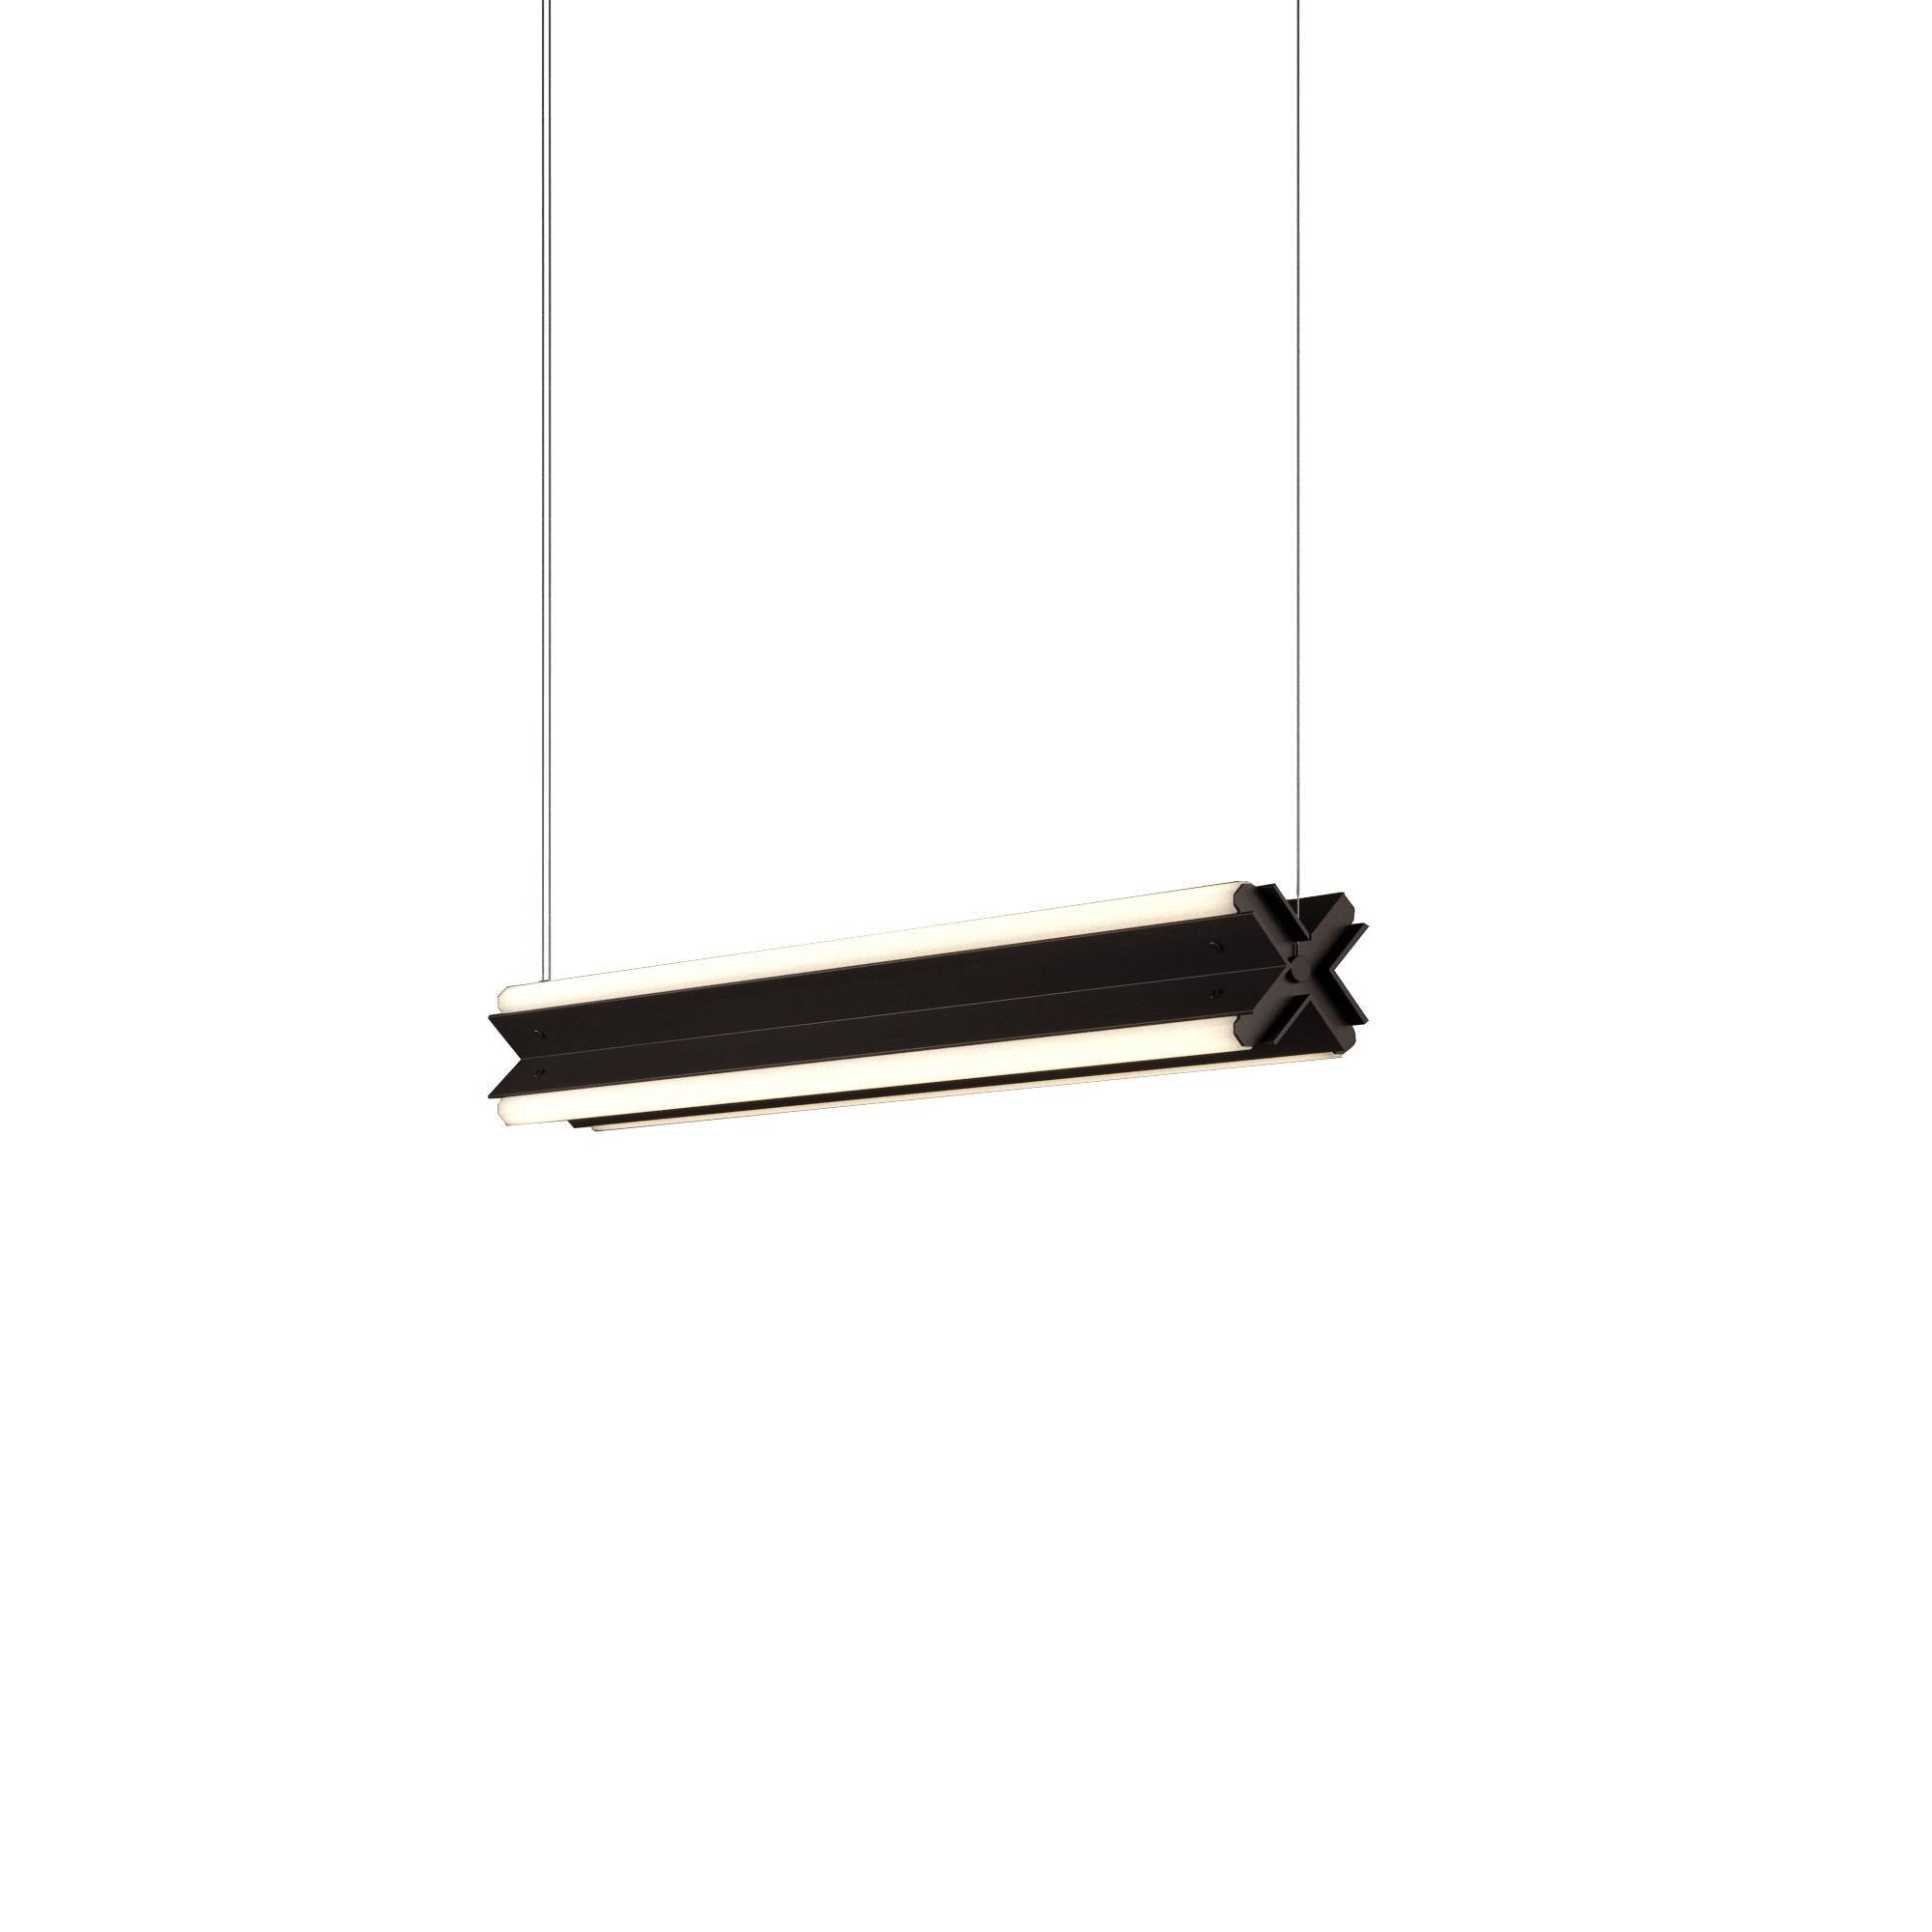 Axis X Suspension Light: Small - 36